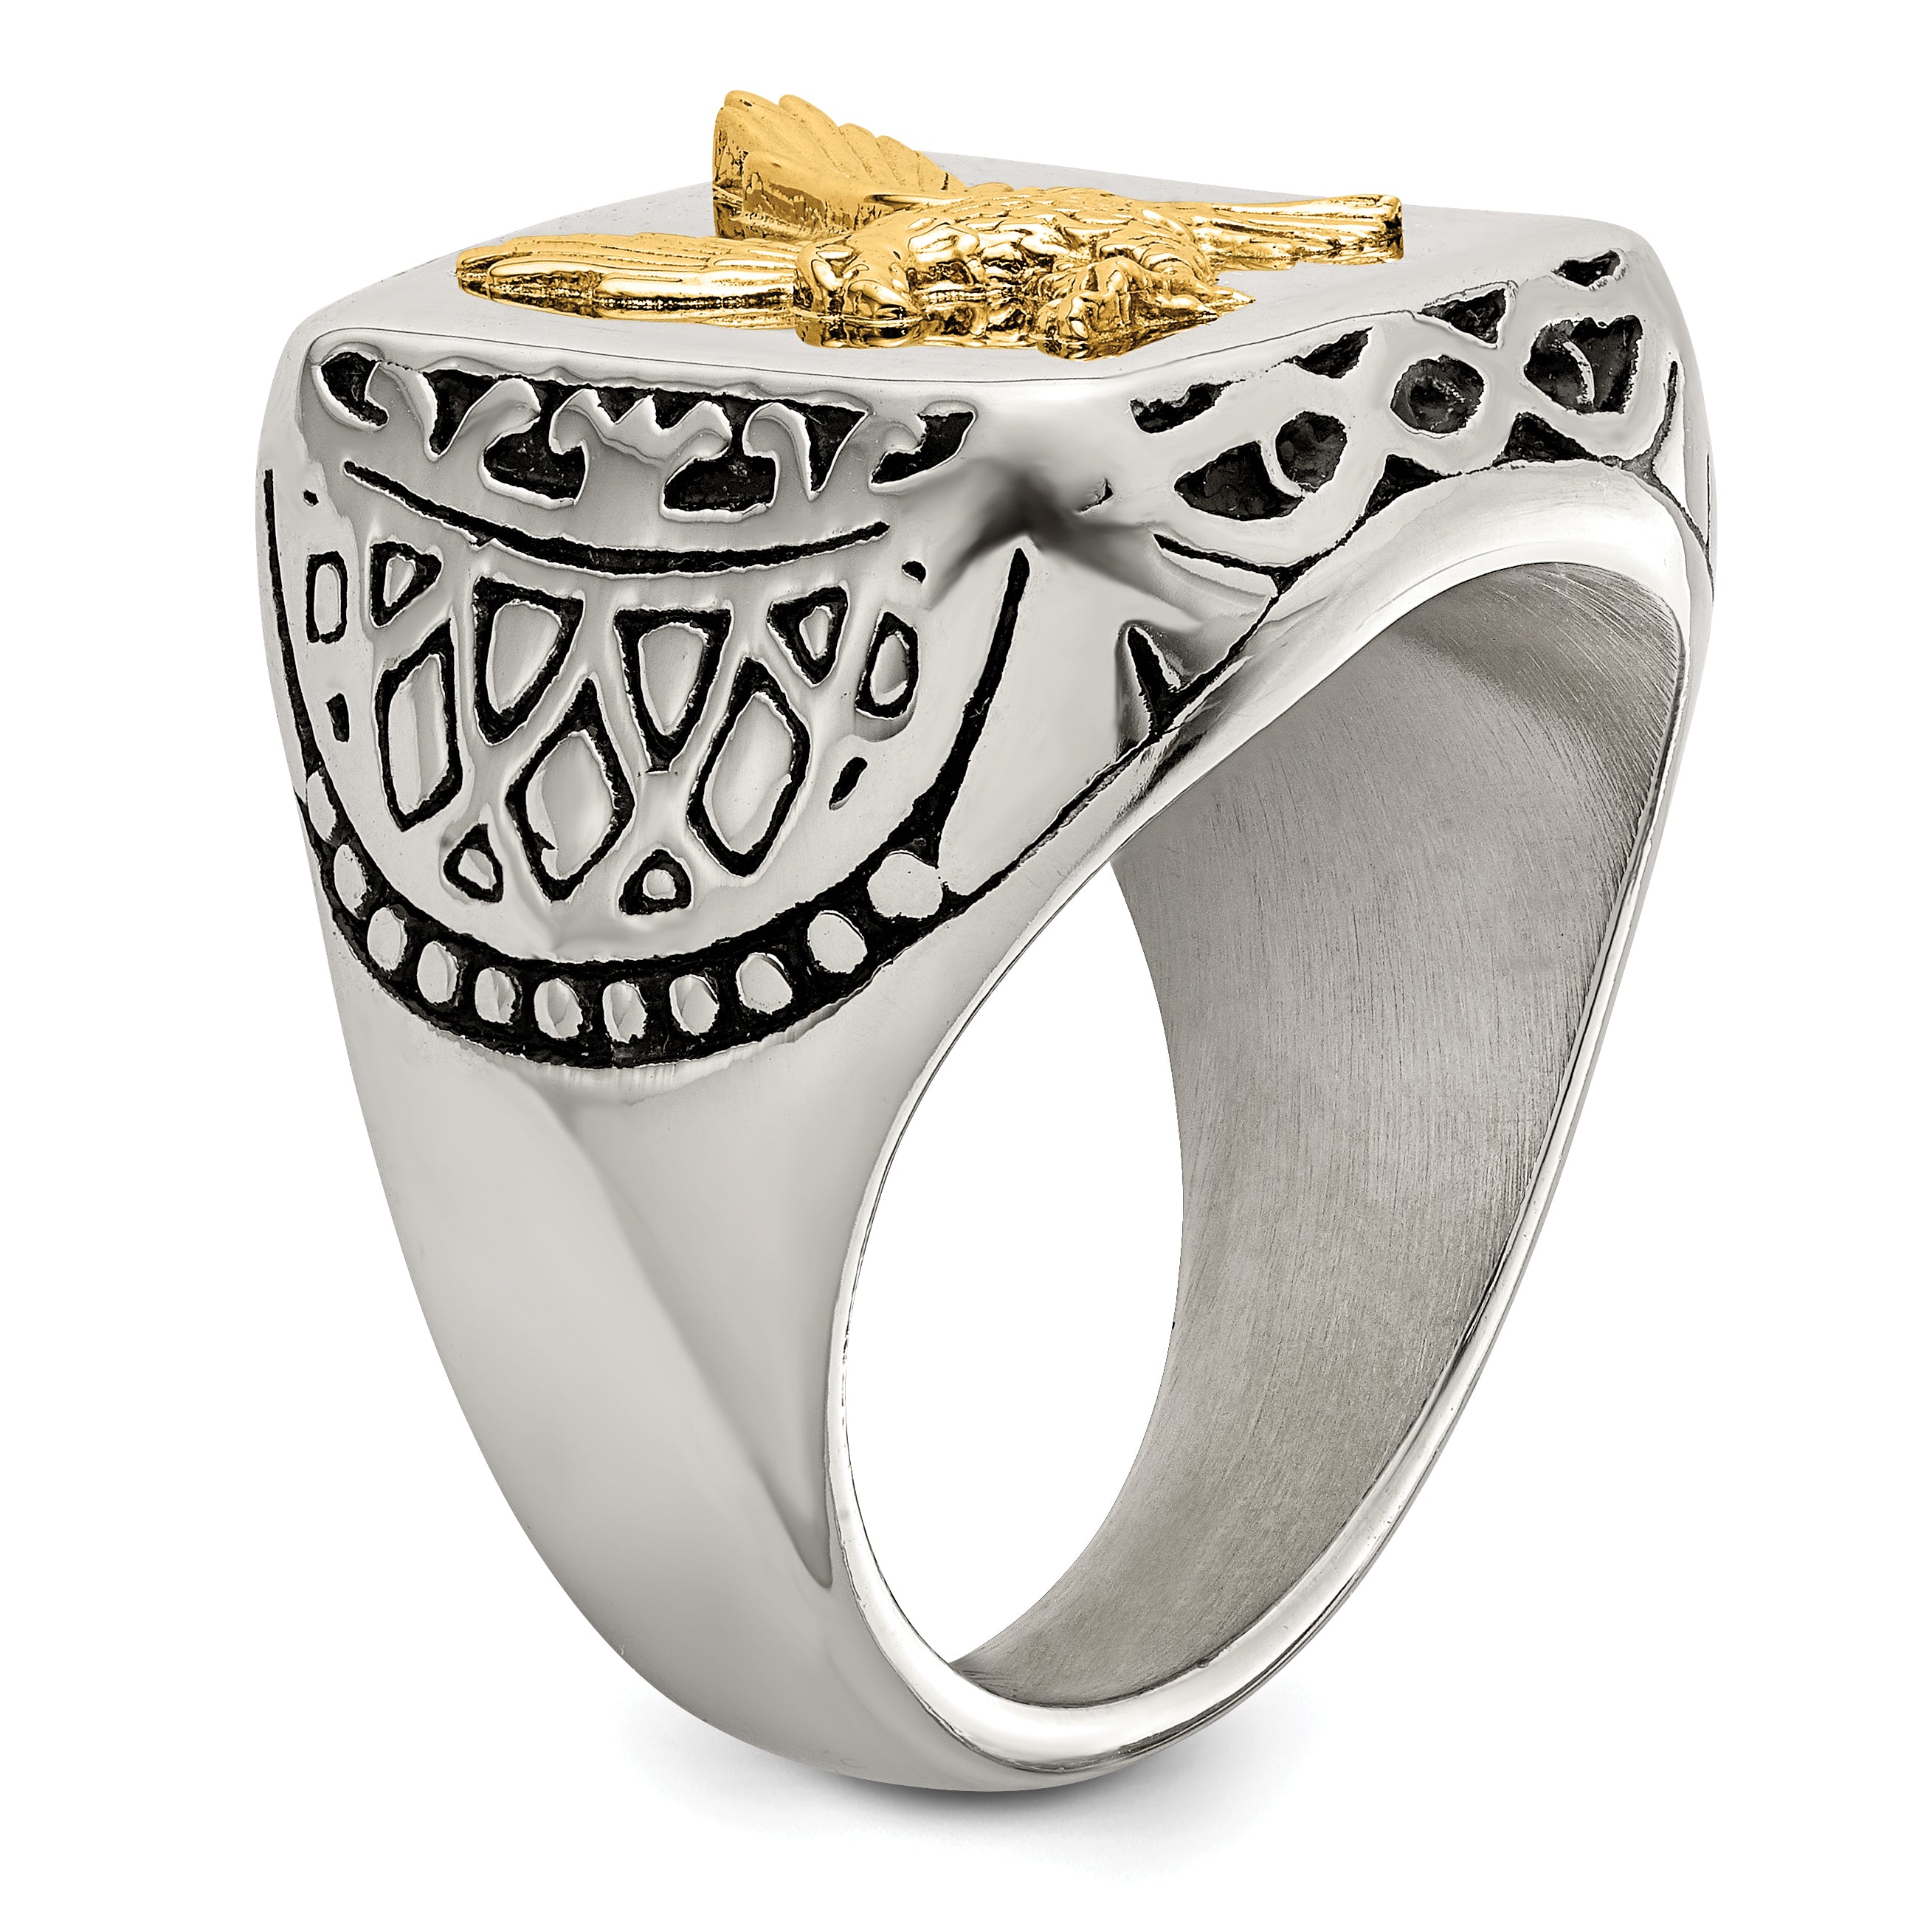 Stainless Steel with 14k Gold Accent Antiqued and Polished Eagle Ring